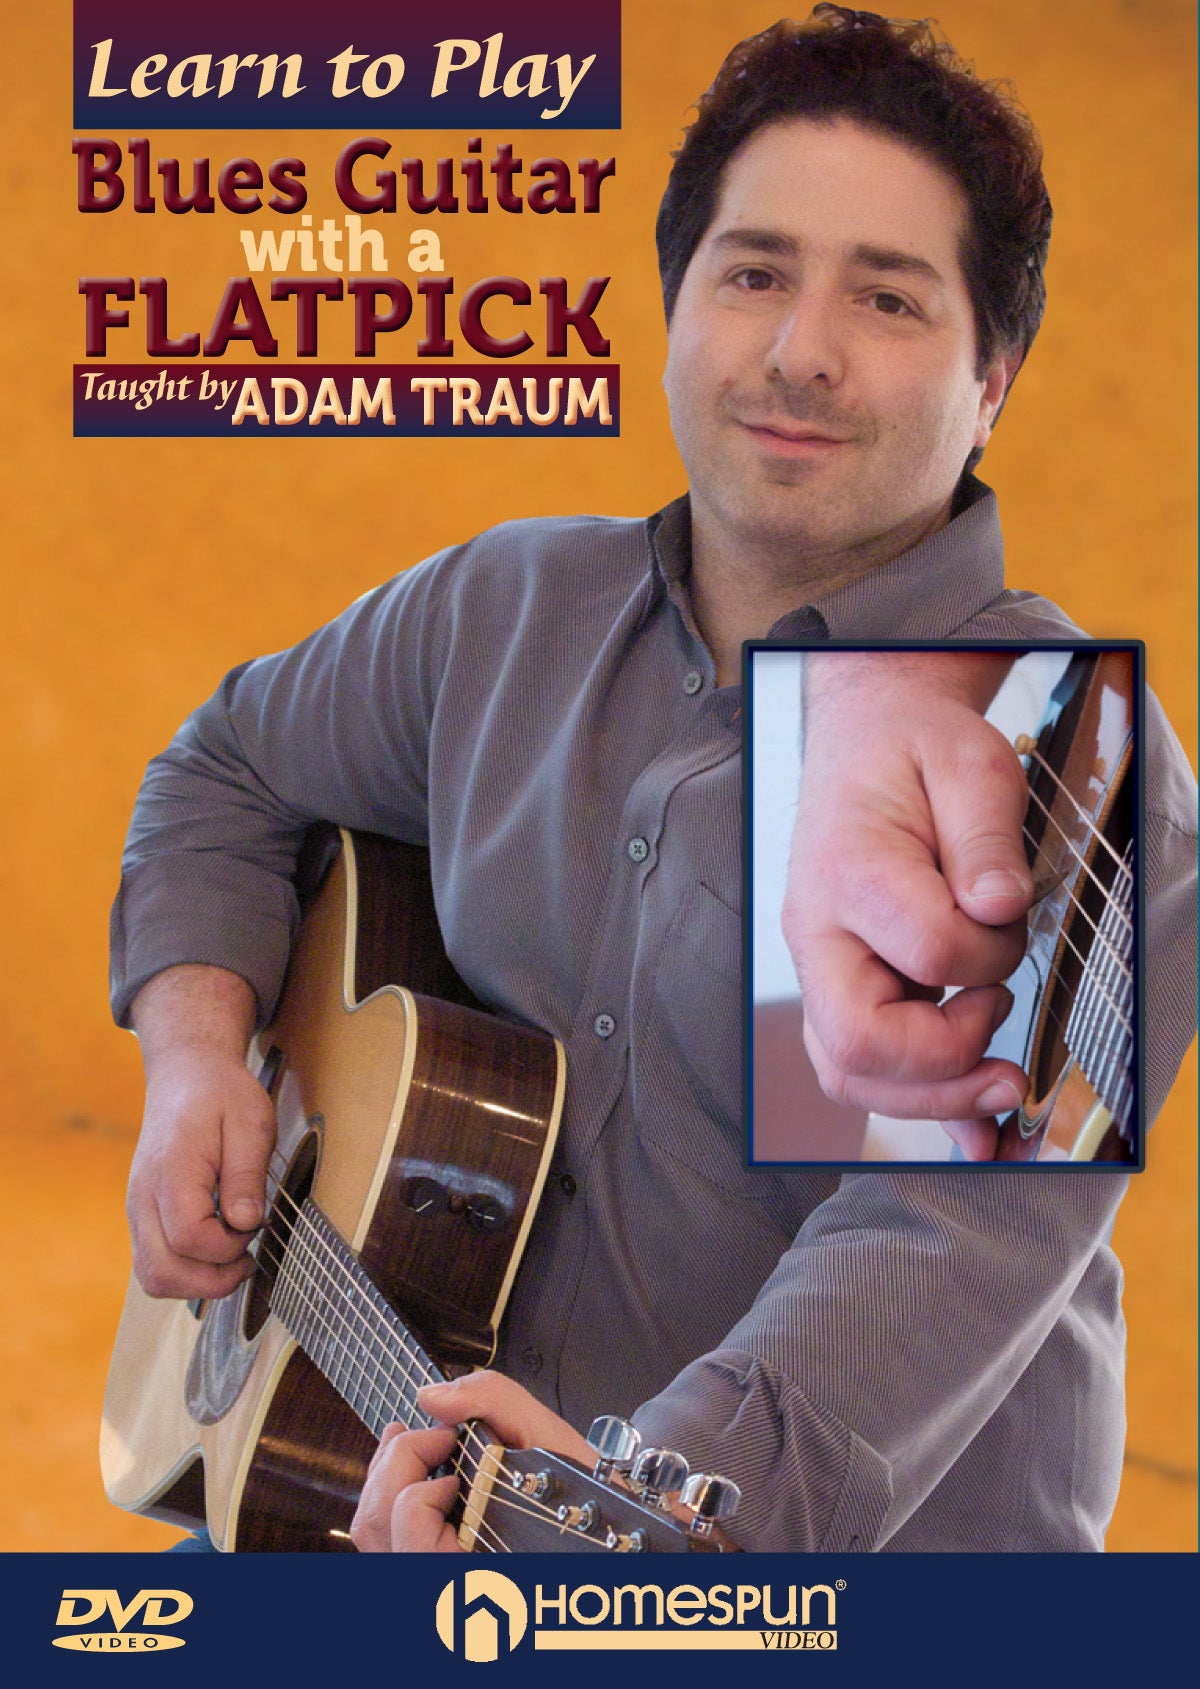 Image 1 of DVD - Learn to Play Blues Guitar with a Flatpick, Vol. 1 - SKU# 300-DVD371 : Product Type Media : Elderly Instruments